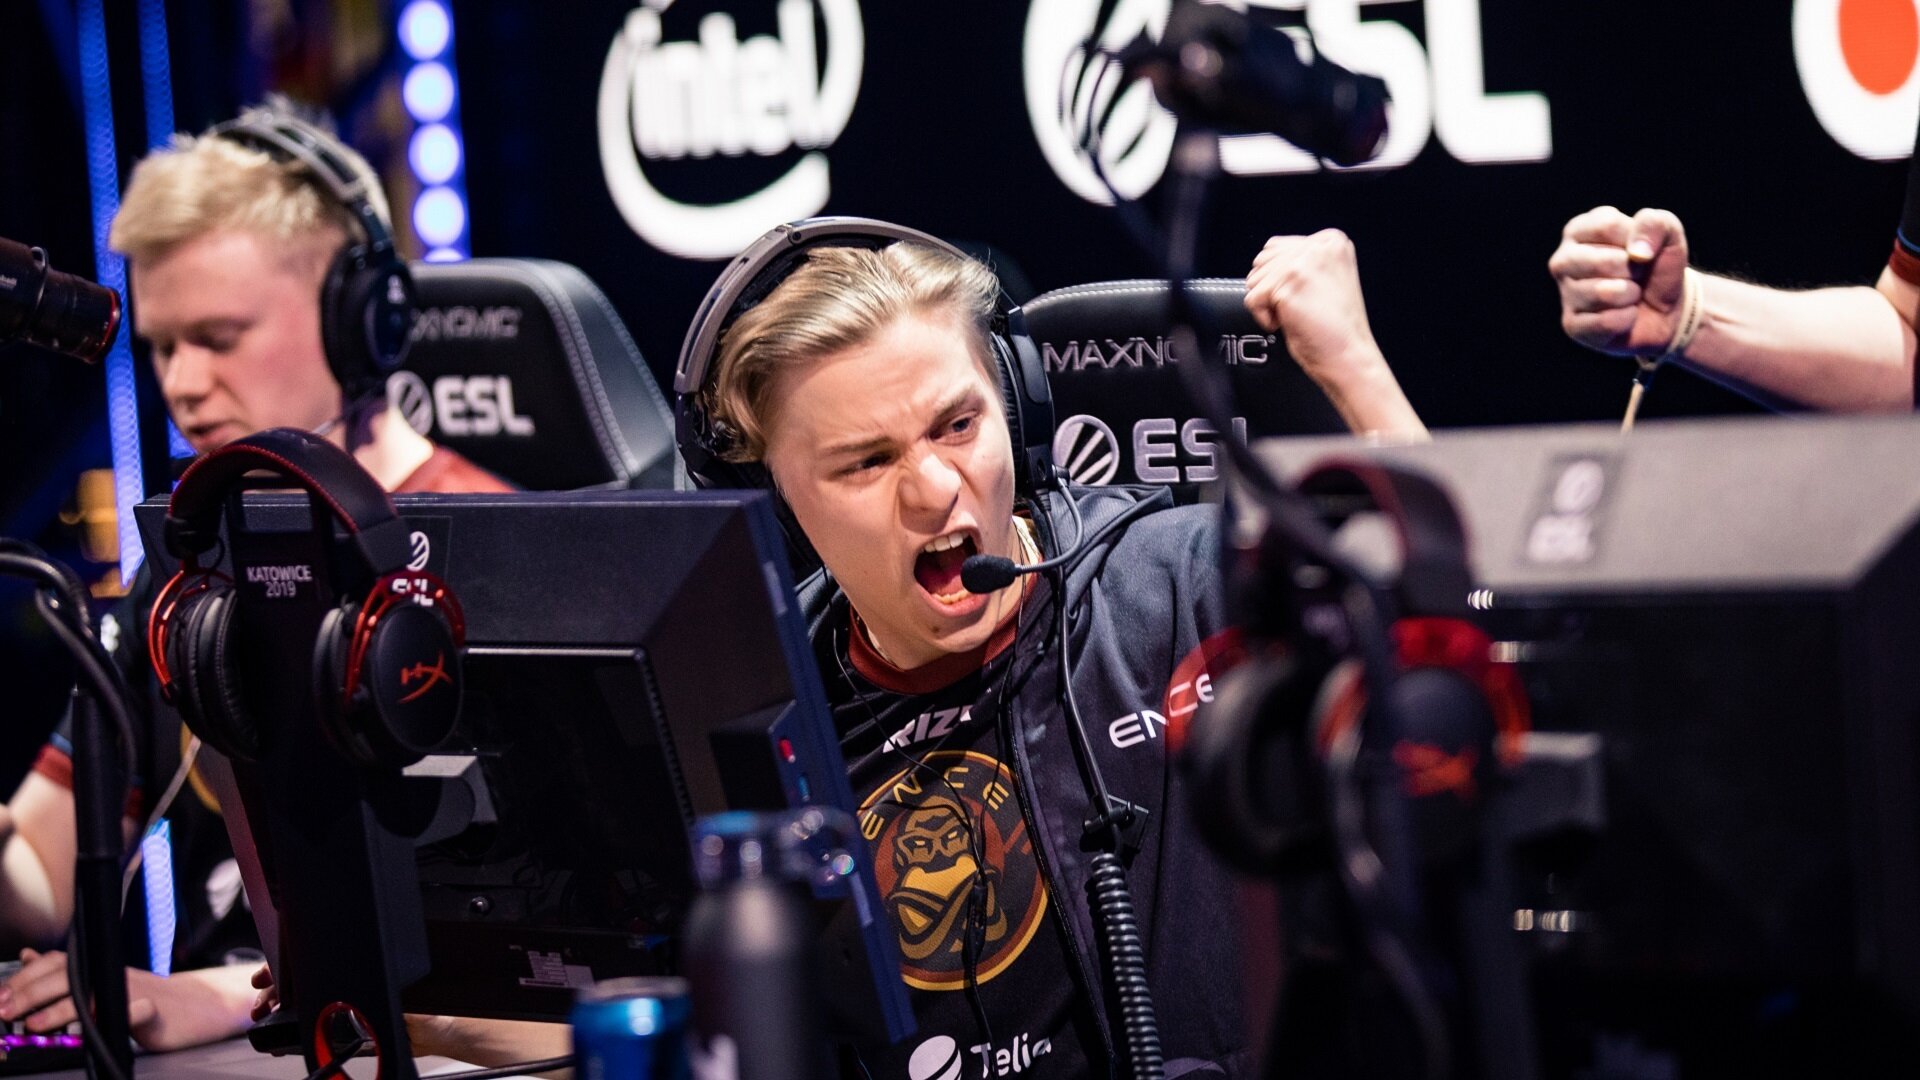 The Champions Stage has finally touched down at IEM Katowice, with the two opening series showing some of the world’s best right off the bat. (Photo courtesy of HLTV.org)